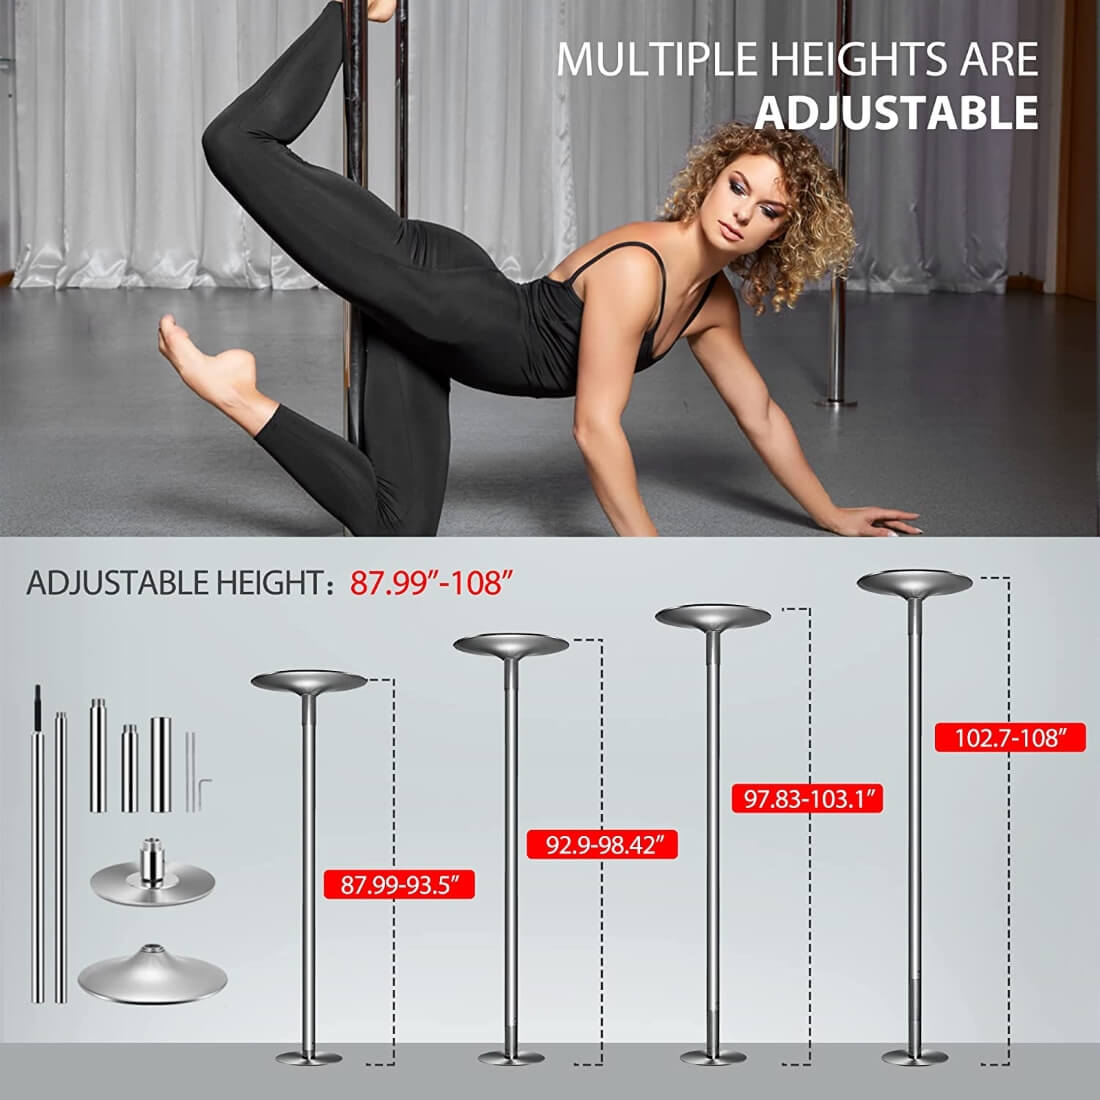 VIVOHOME Fitness Portable Workout Spinning Dance Stripping Pole